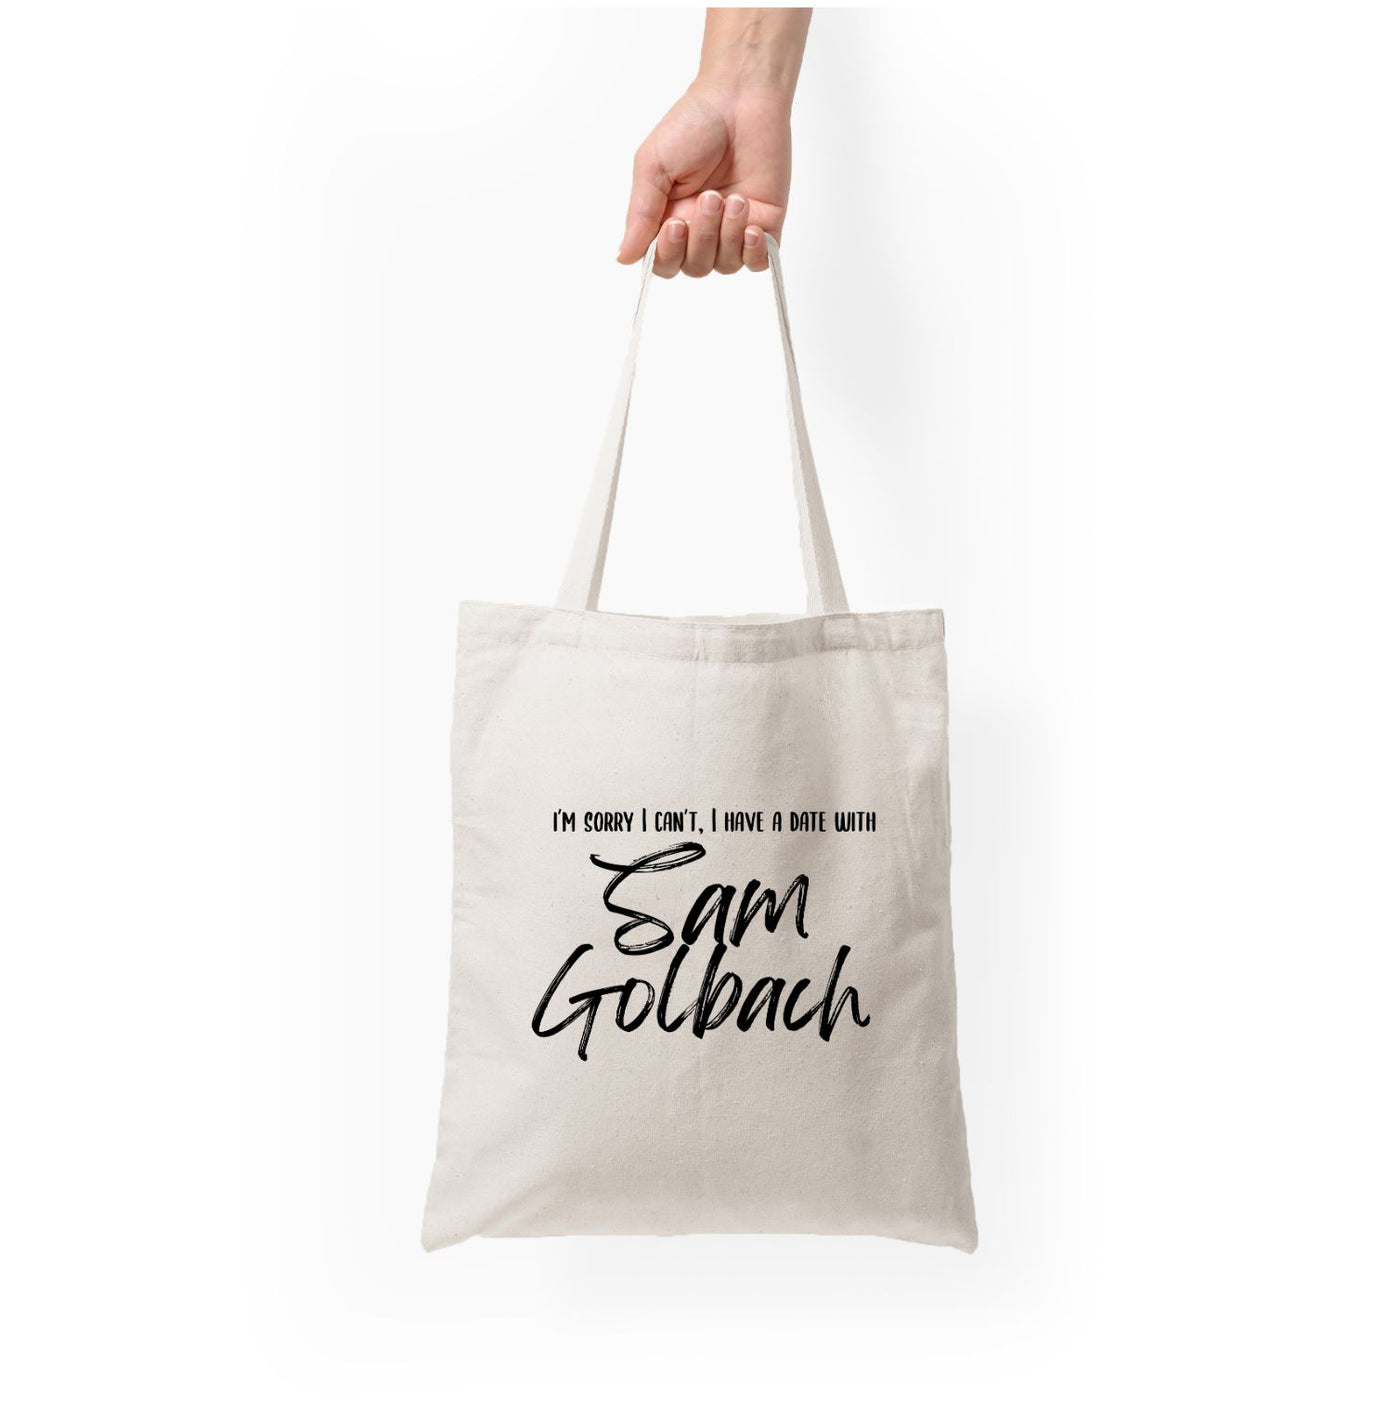 Date With Sam - Sam And Colby Tote Bag